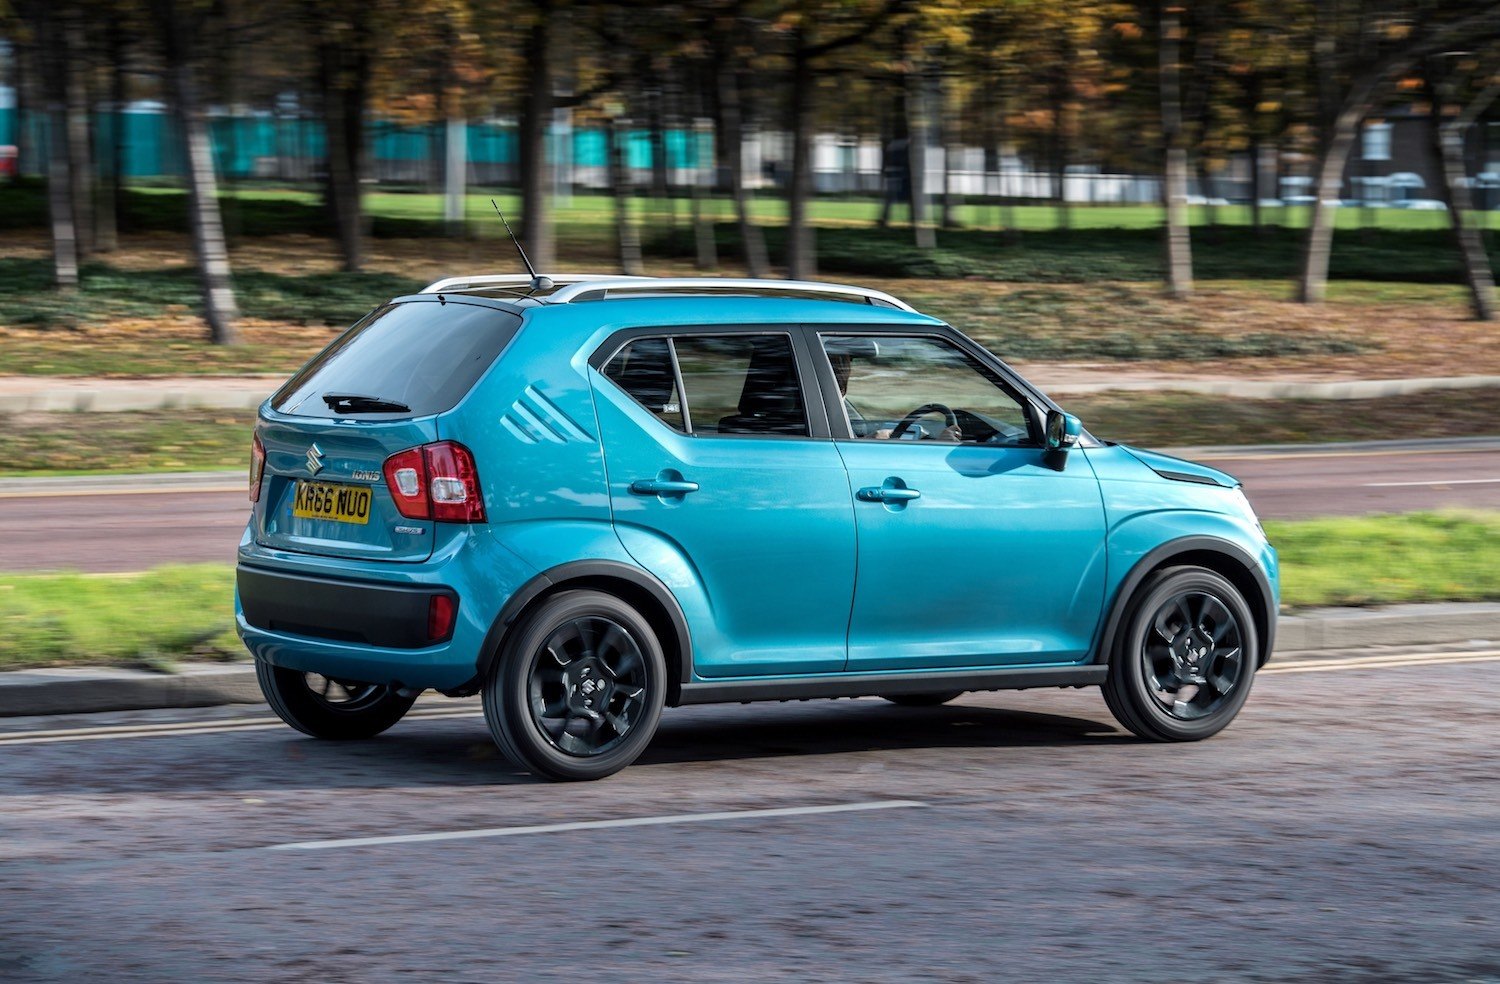 Neil Lyndon reviews the Suzuki Ignis for Drive 2